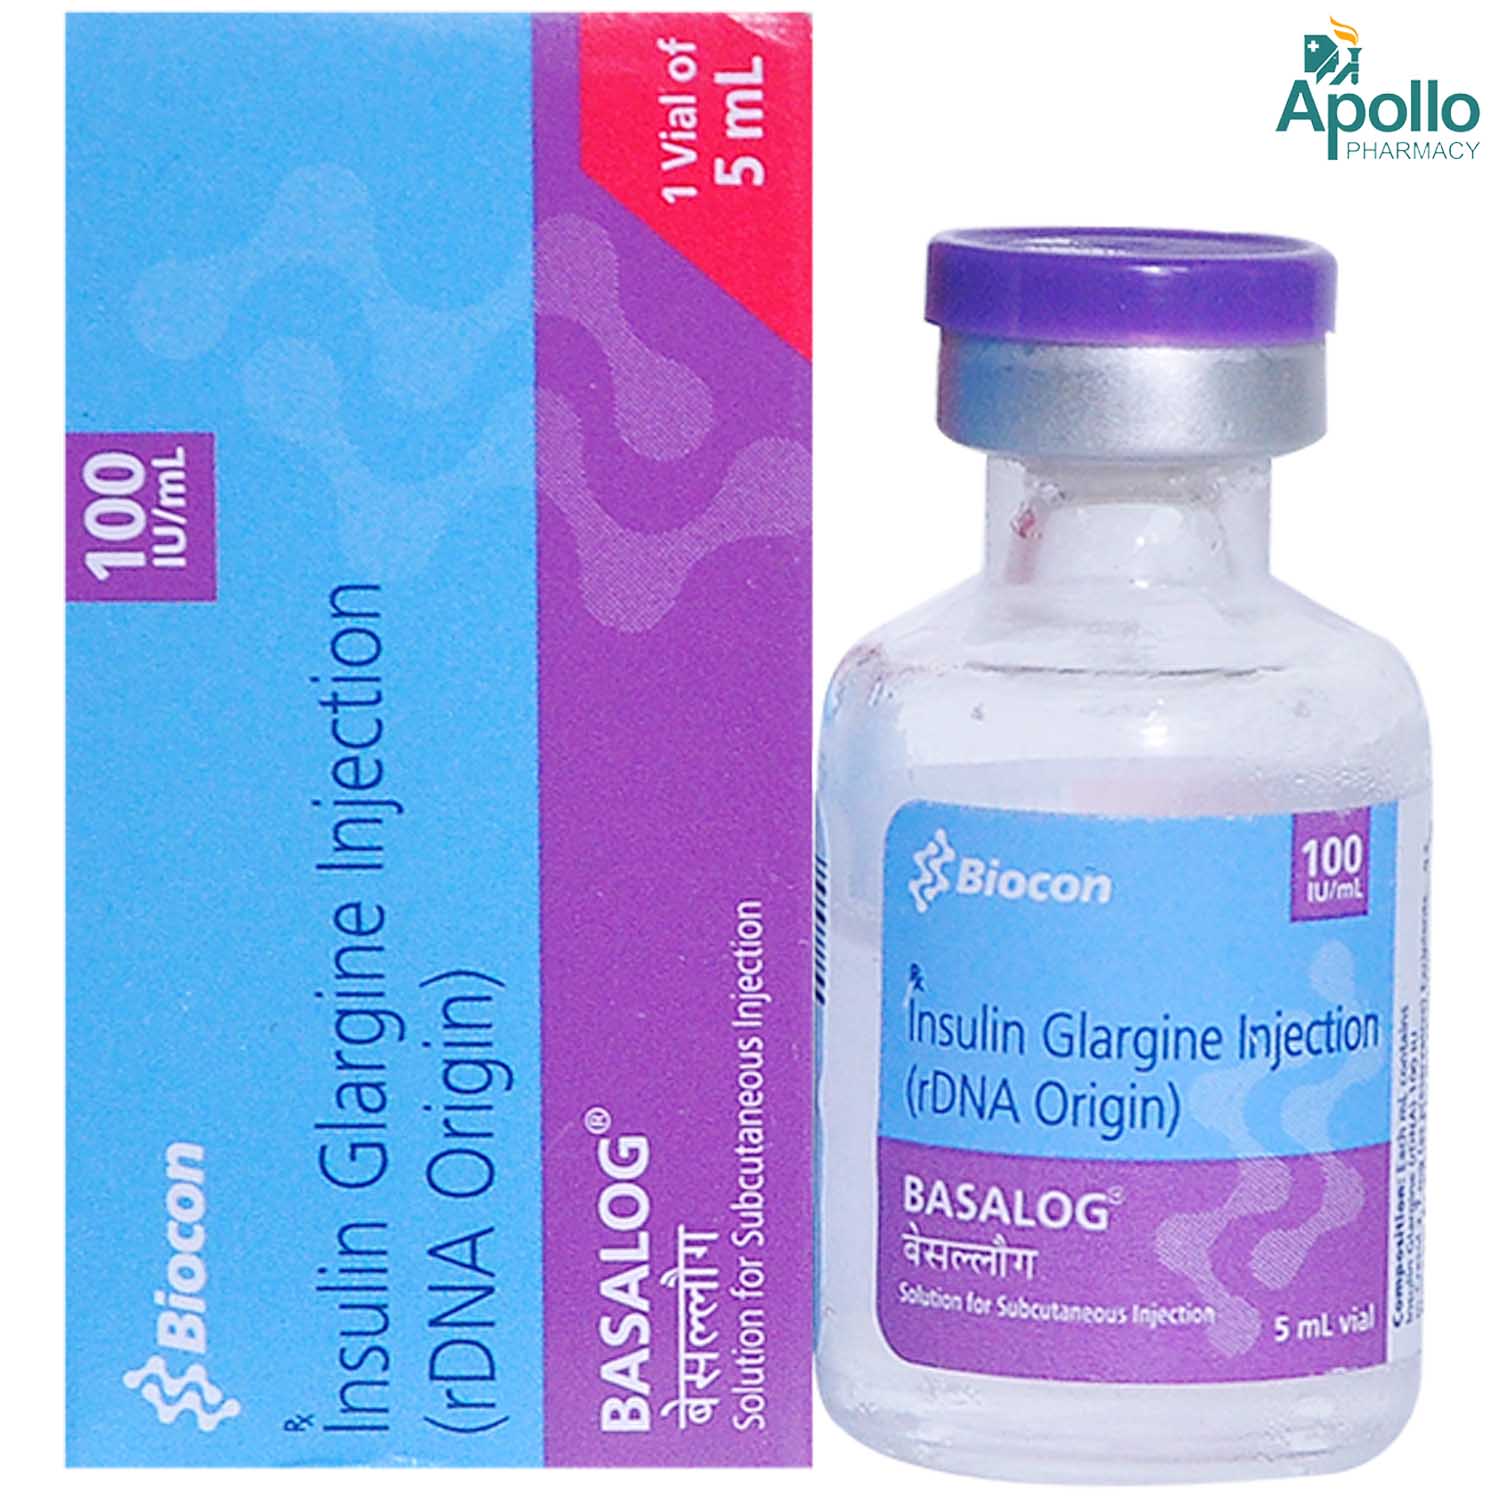 Basalog 100iu Injection 5ml Price Uses Side Effects Composition Apollo Pharmacy